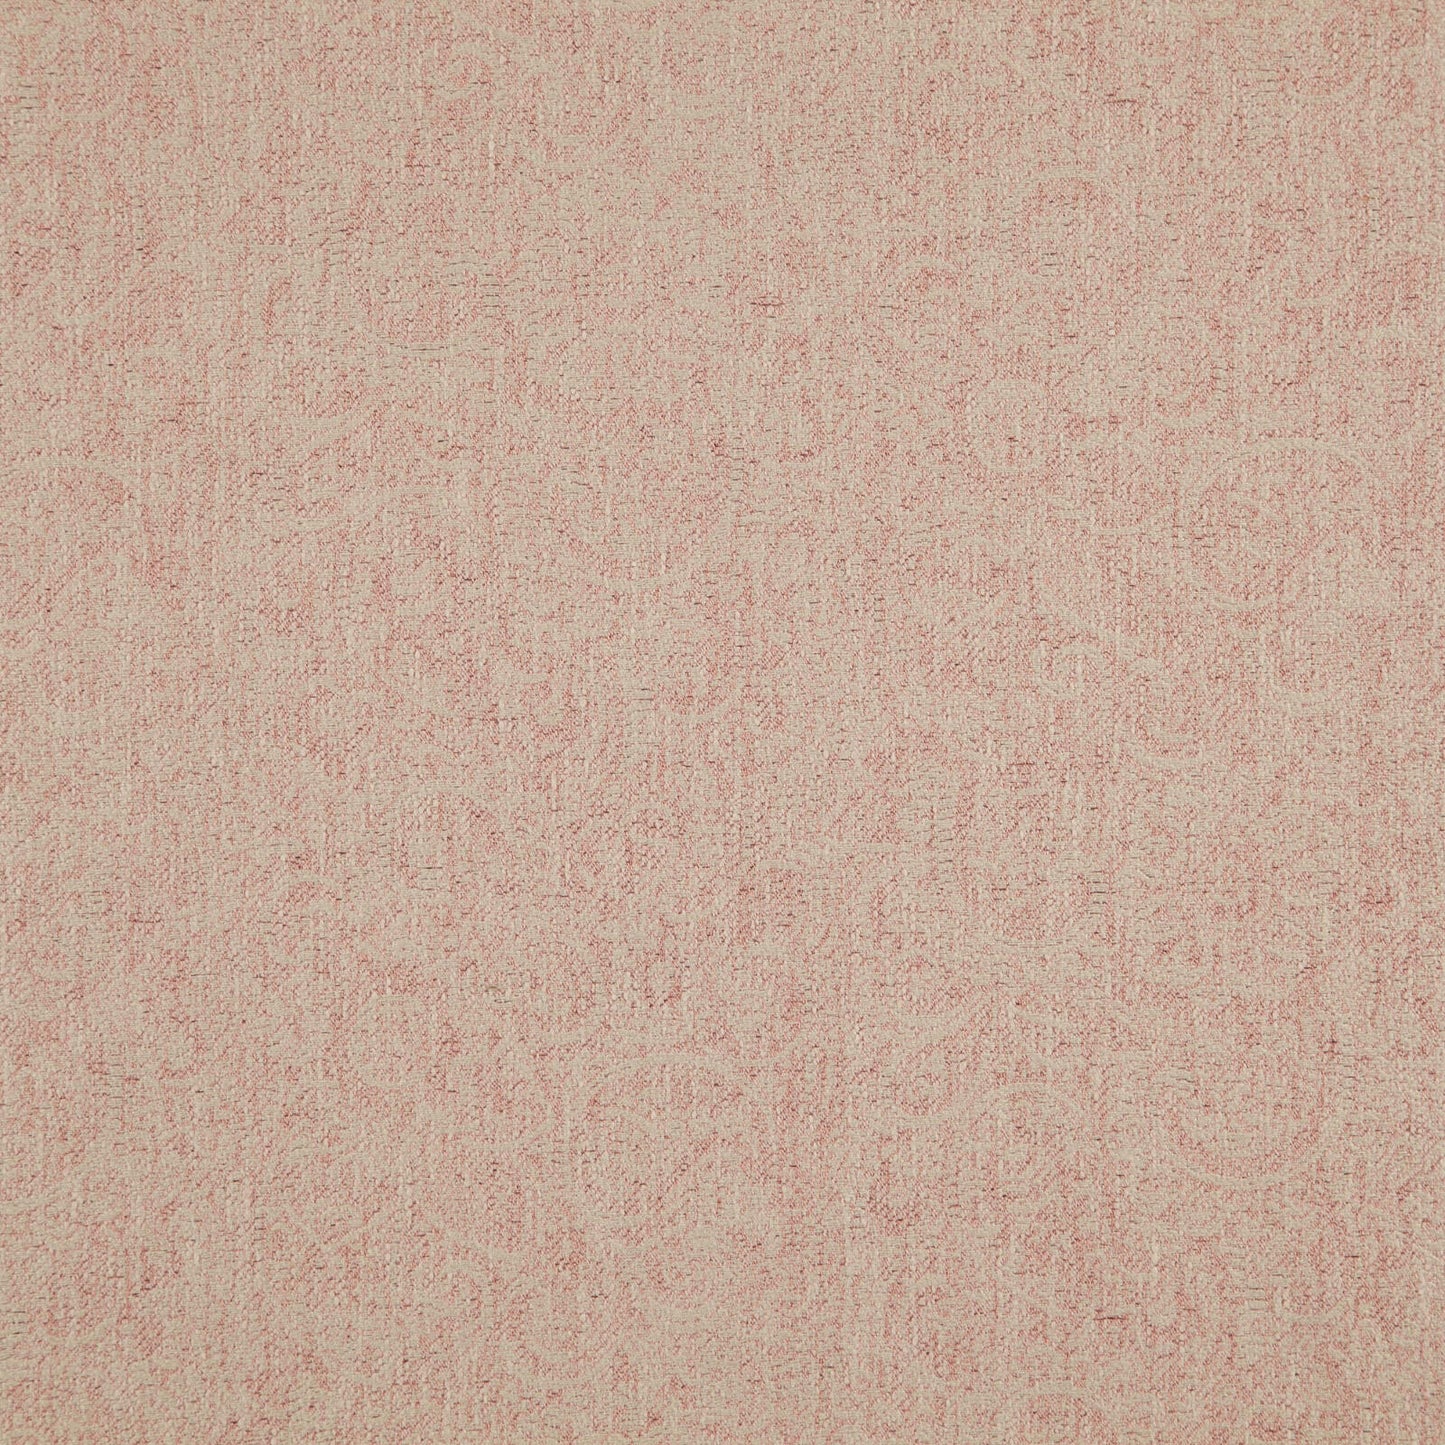 Purchase Maxwell Fabric - Parity, # 151 Blossom